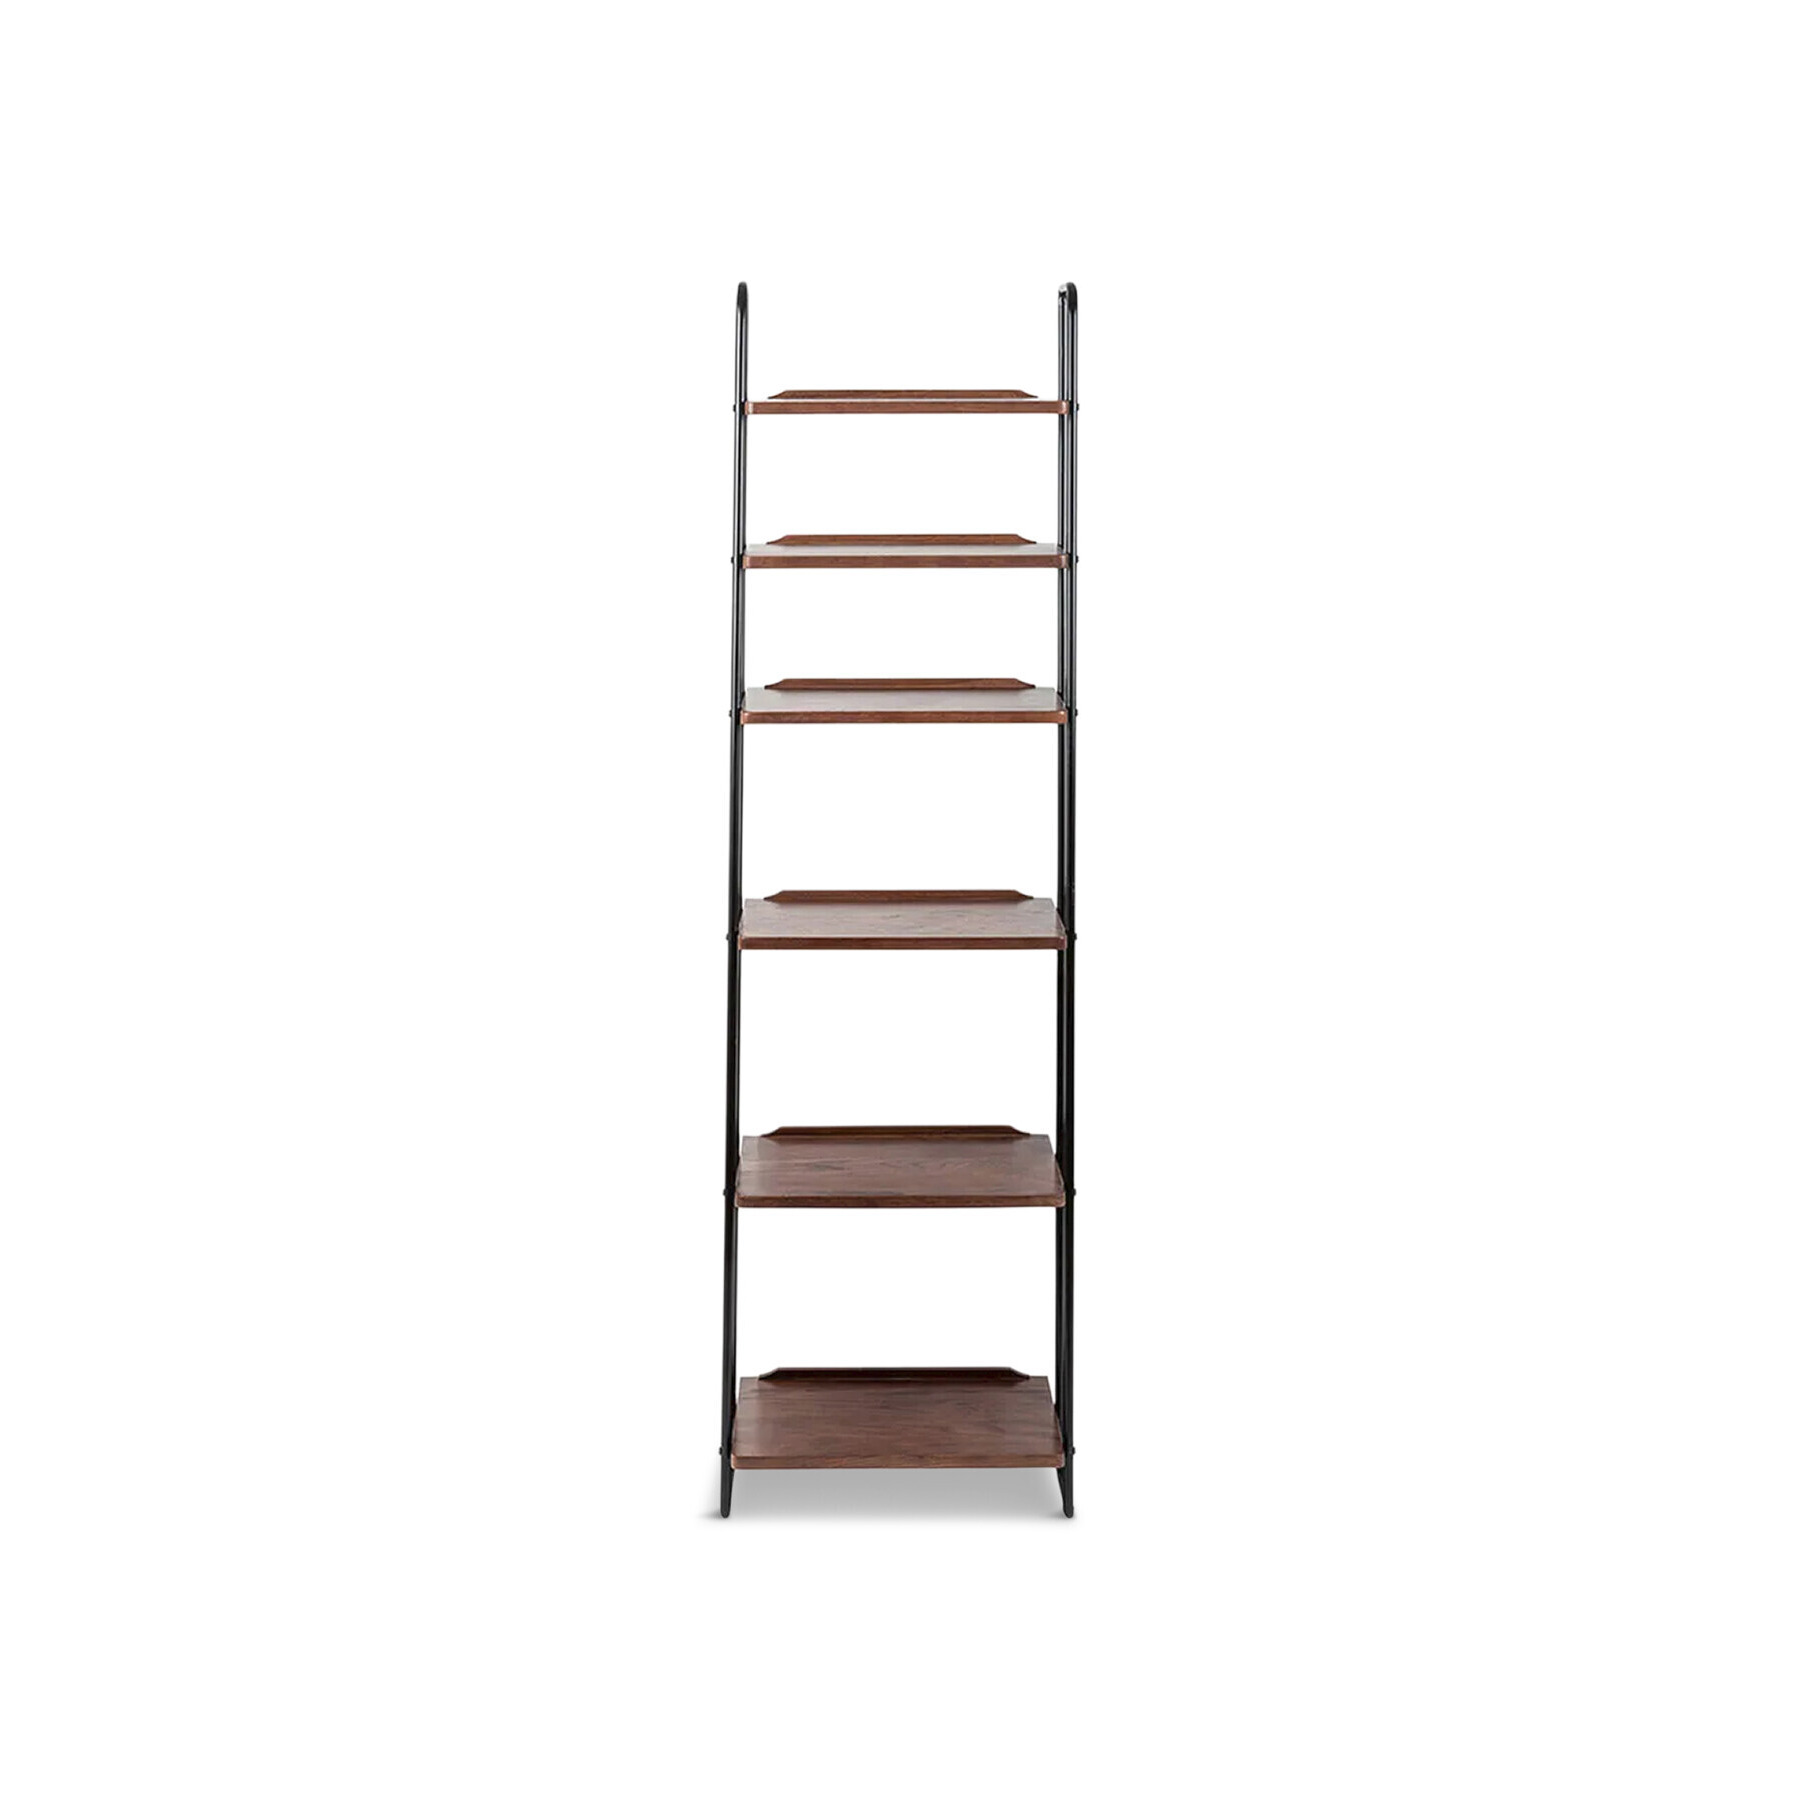 Heal's Brunel Lean To Narrow Shelves Dark Wood - Size 50x35x175 Brown - image 1